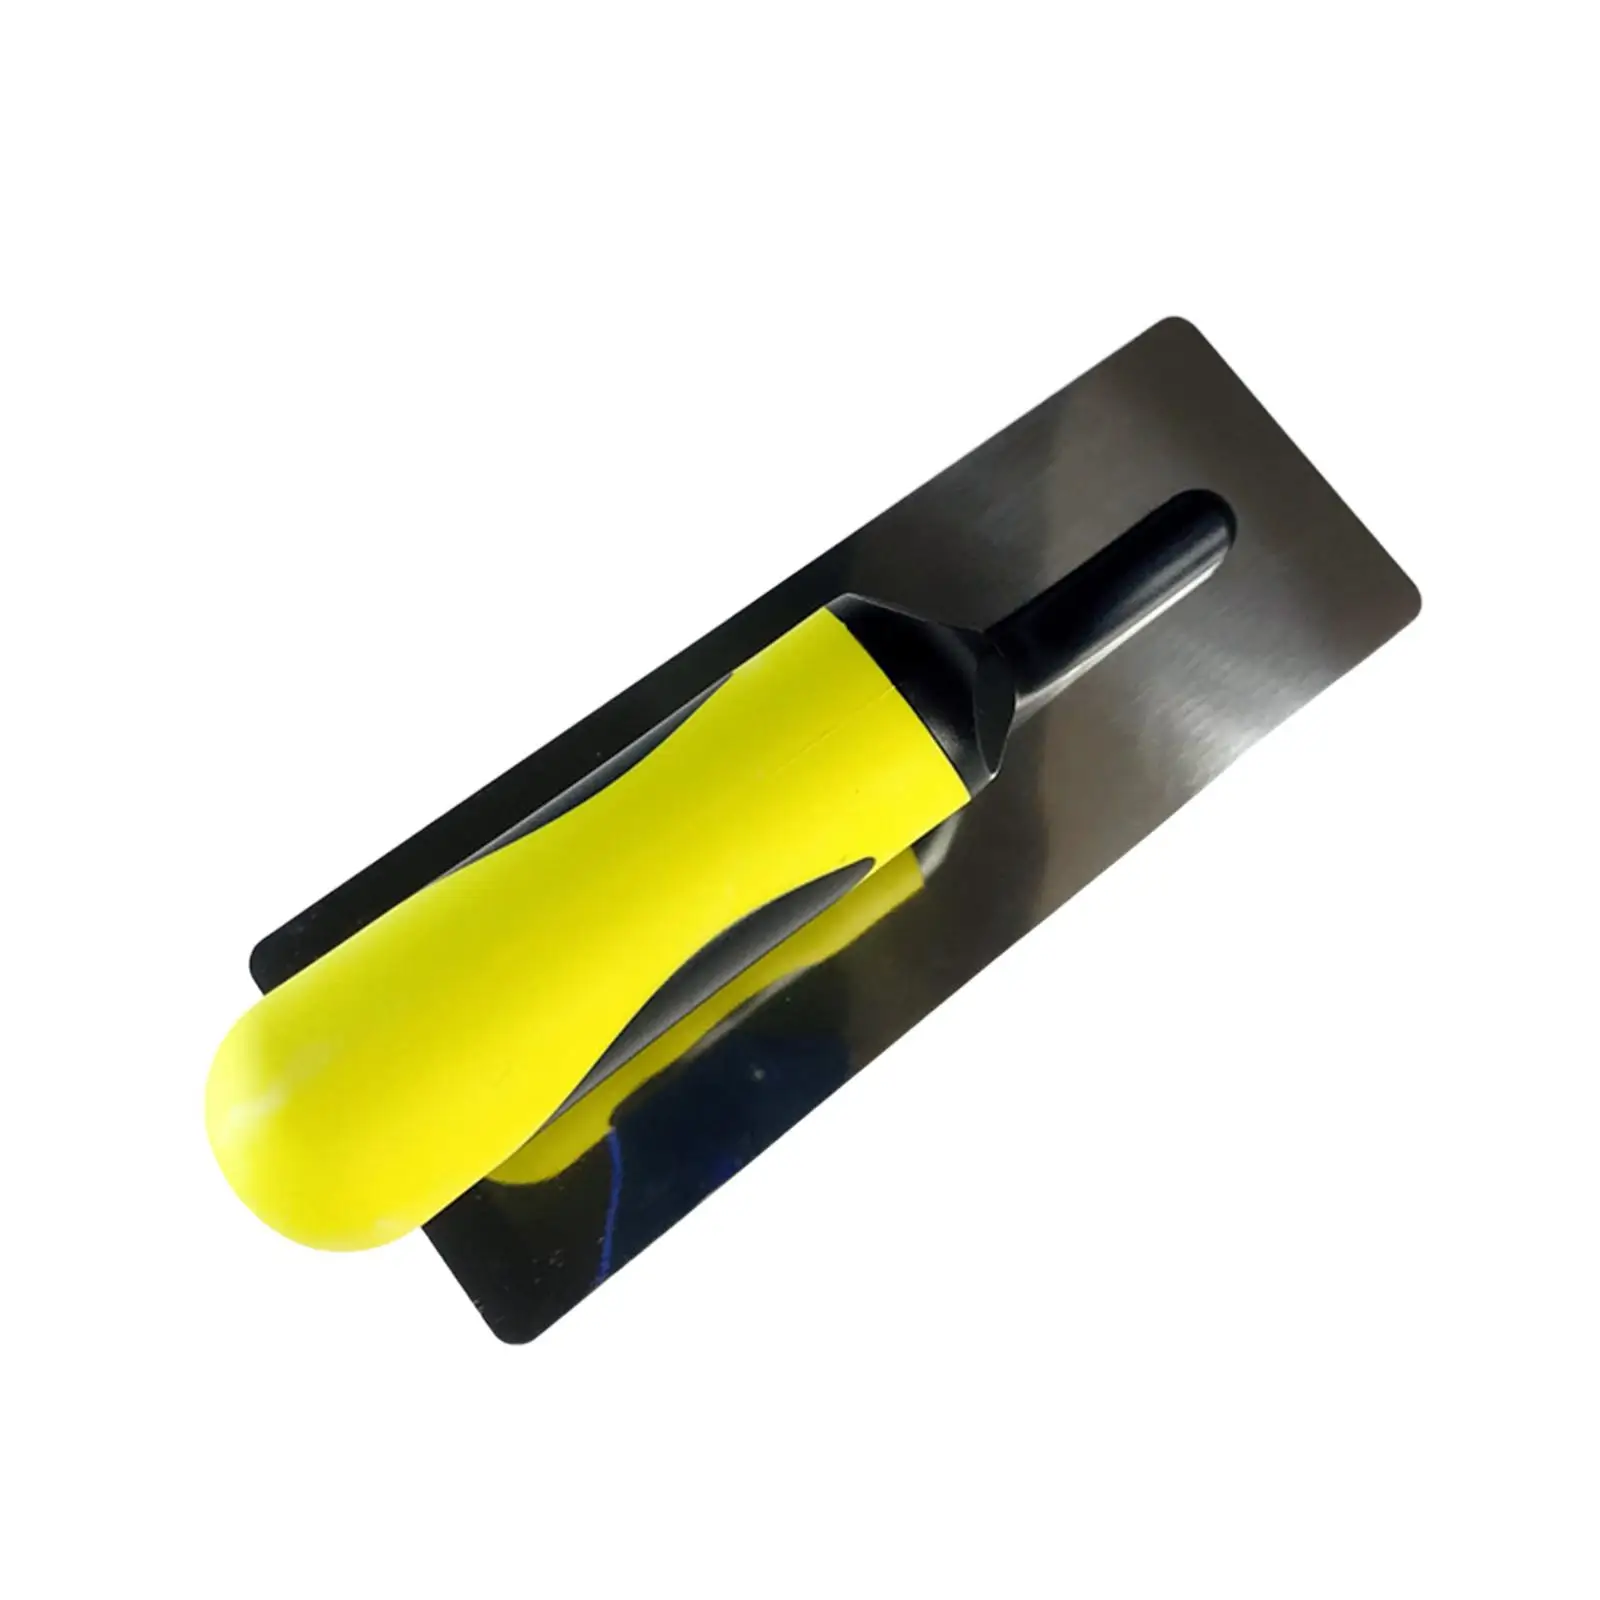 Finisher Plastering Trowel Sturdy Knife Scraper for Cement Repairing Drywall